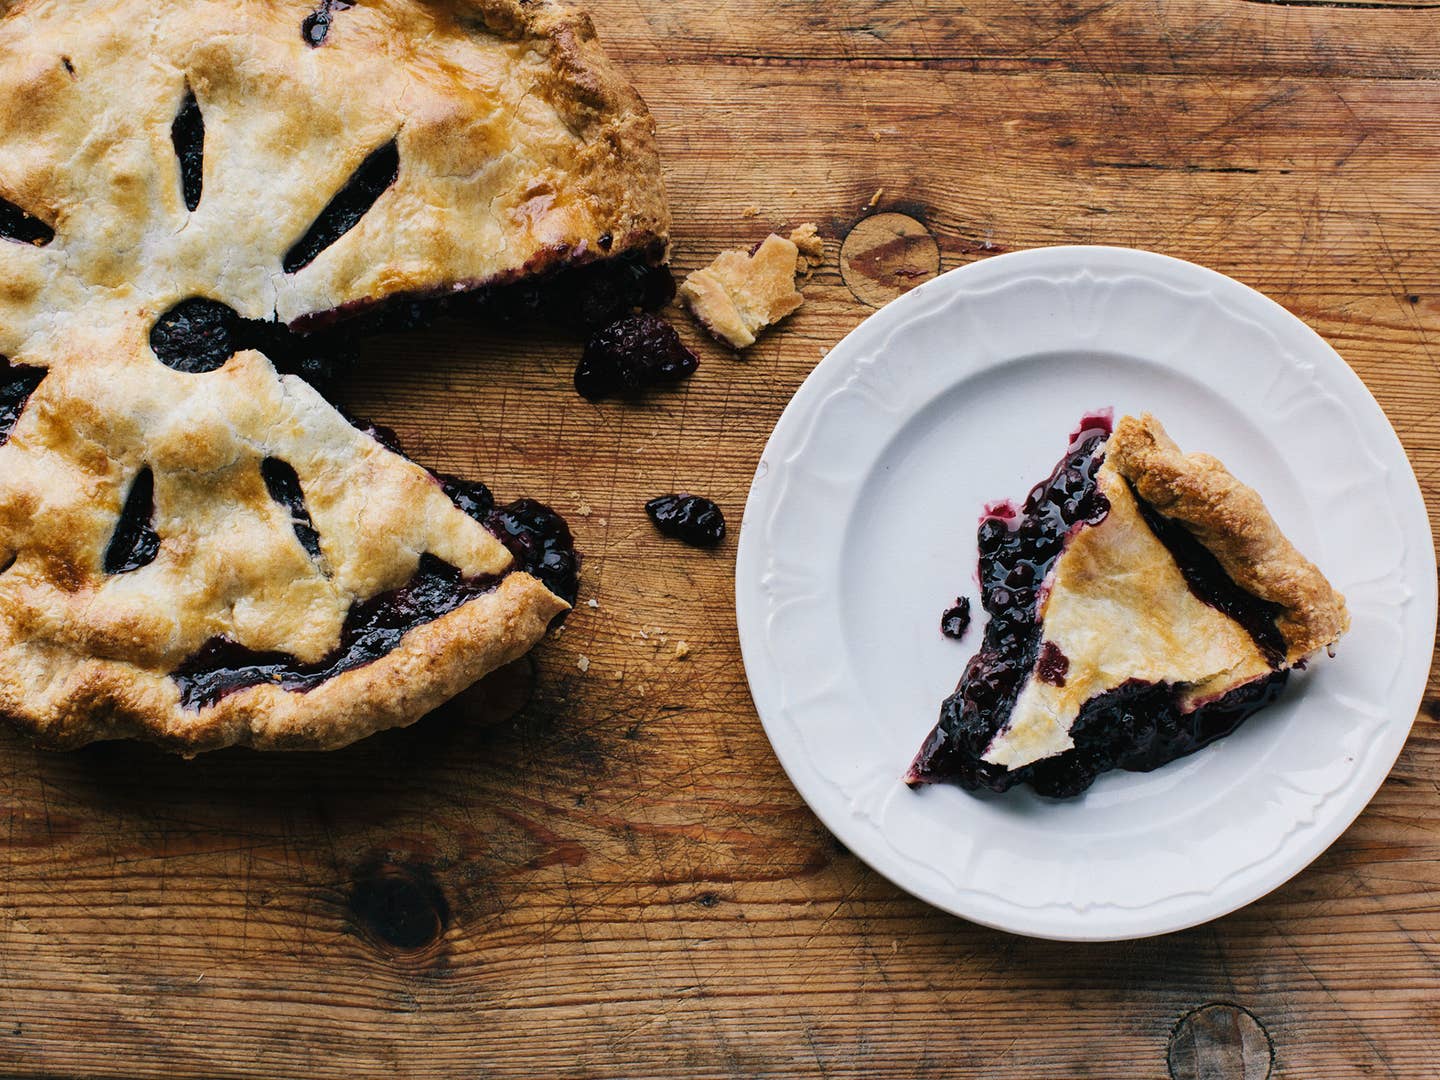 Blackberry and Blueberry Pie for Blueberry Recipes